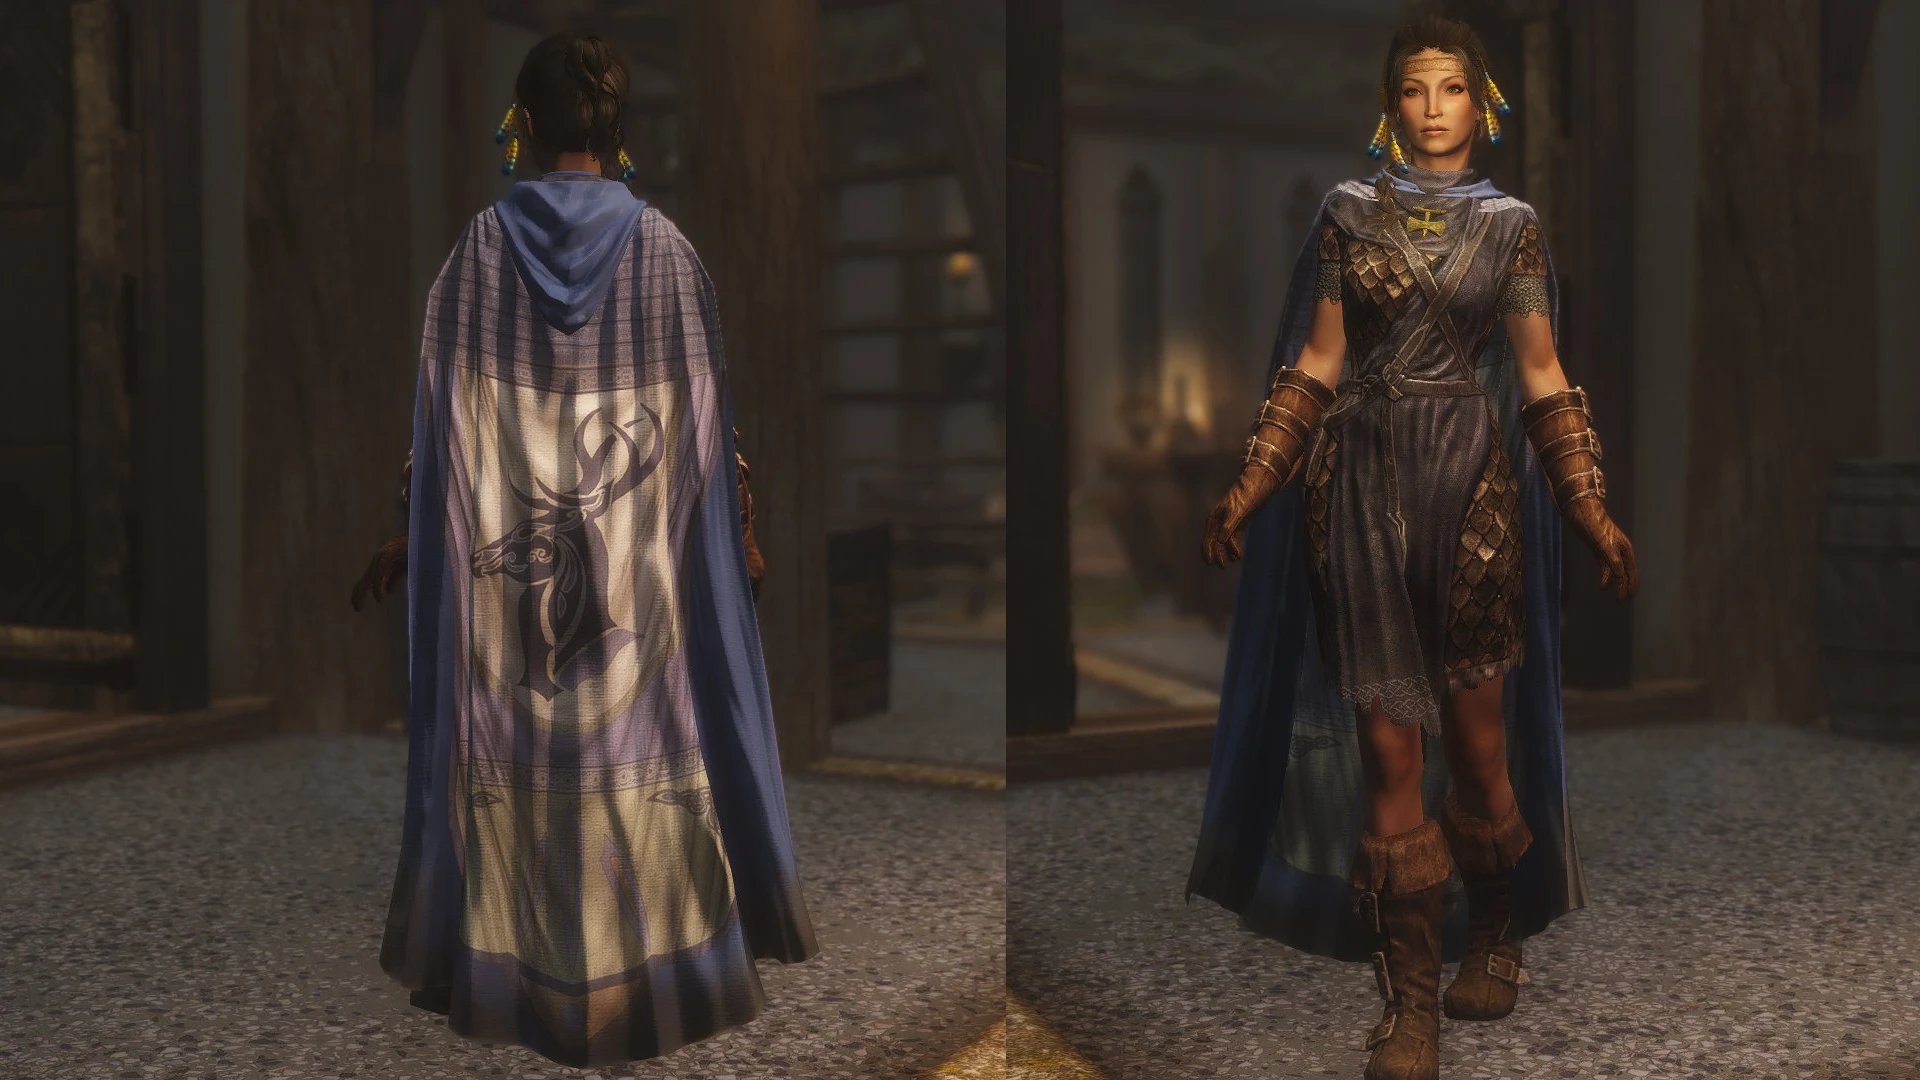 cloaks and capes or cloaks of skyrim